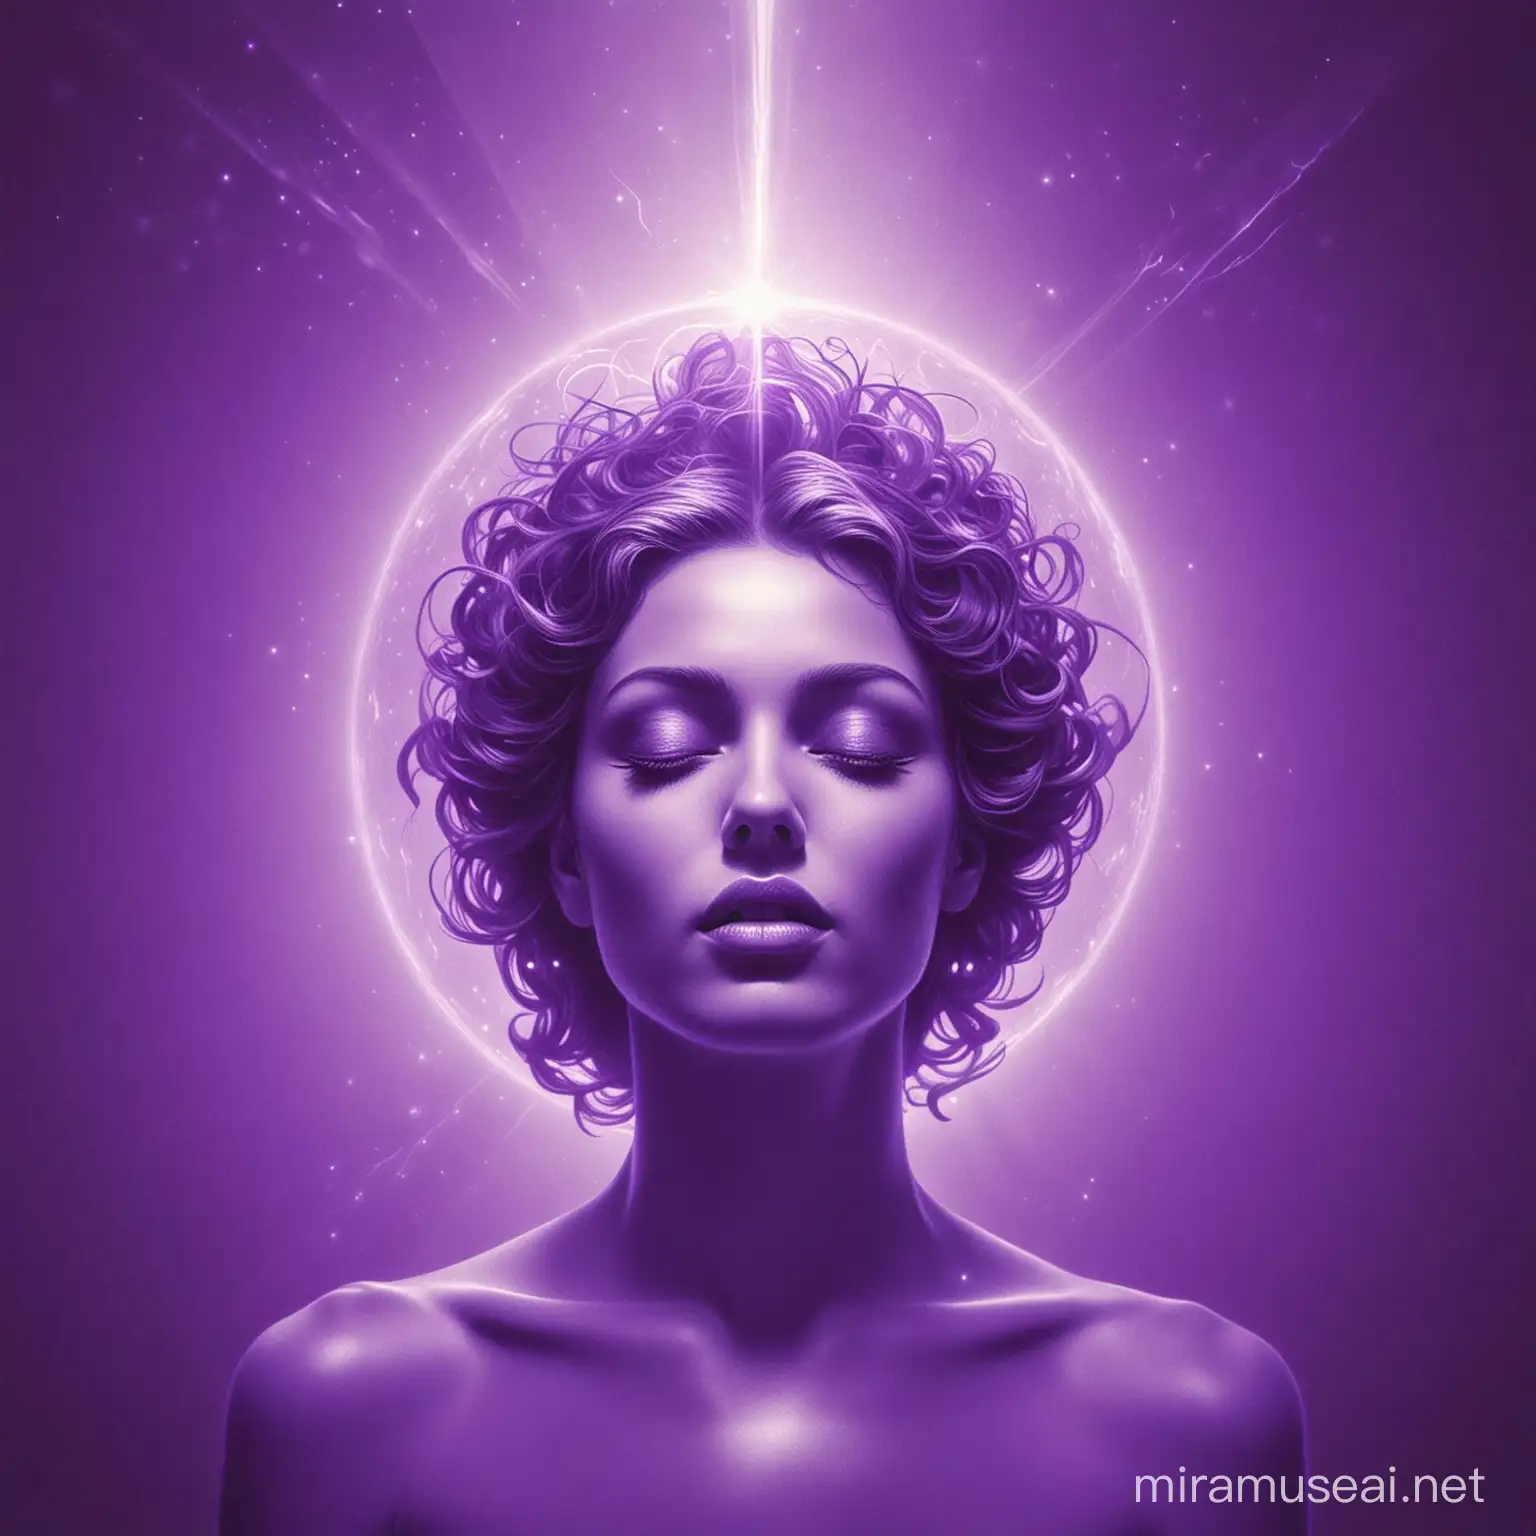 opening of the consciousness in purple hue
